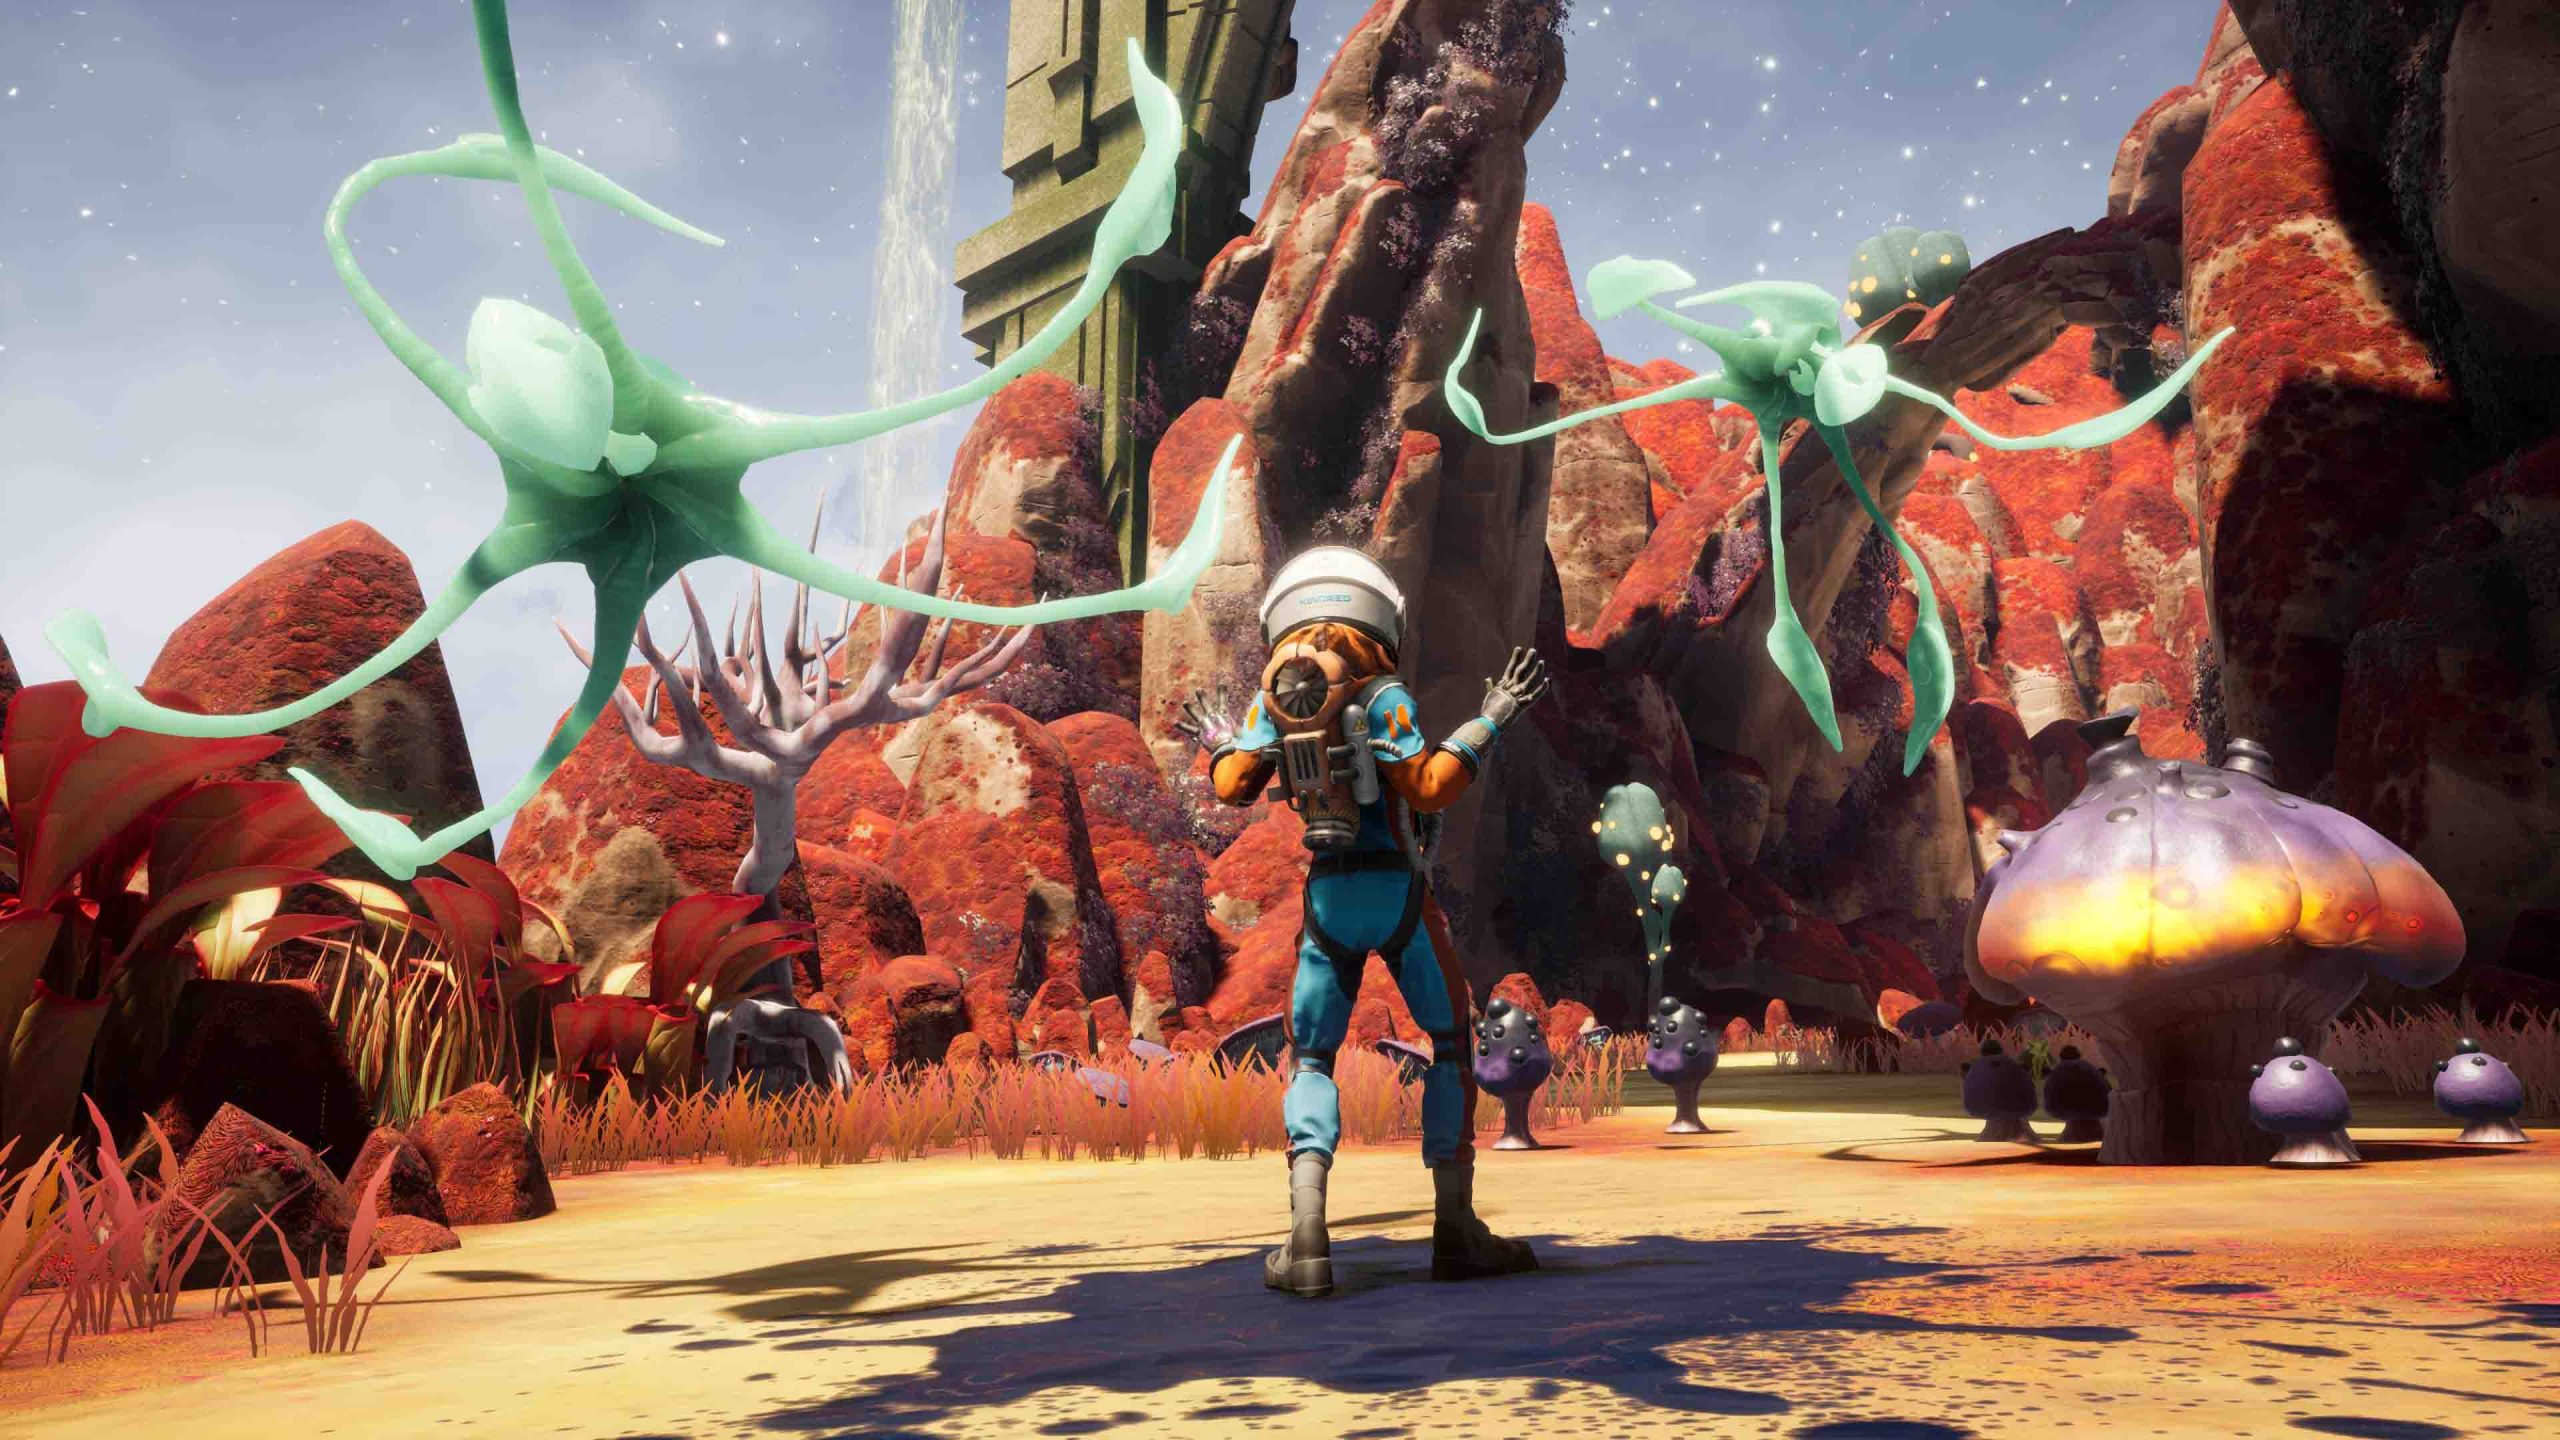 Journey to the Savage Planet System Requirements for PC Games minimum, recommended specifications for Windows, CPU, OS, Processor, RAM Memory, Storage, and GPU.